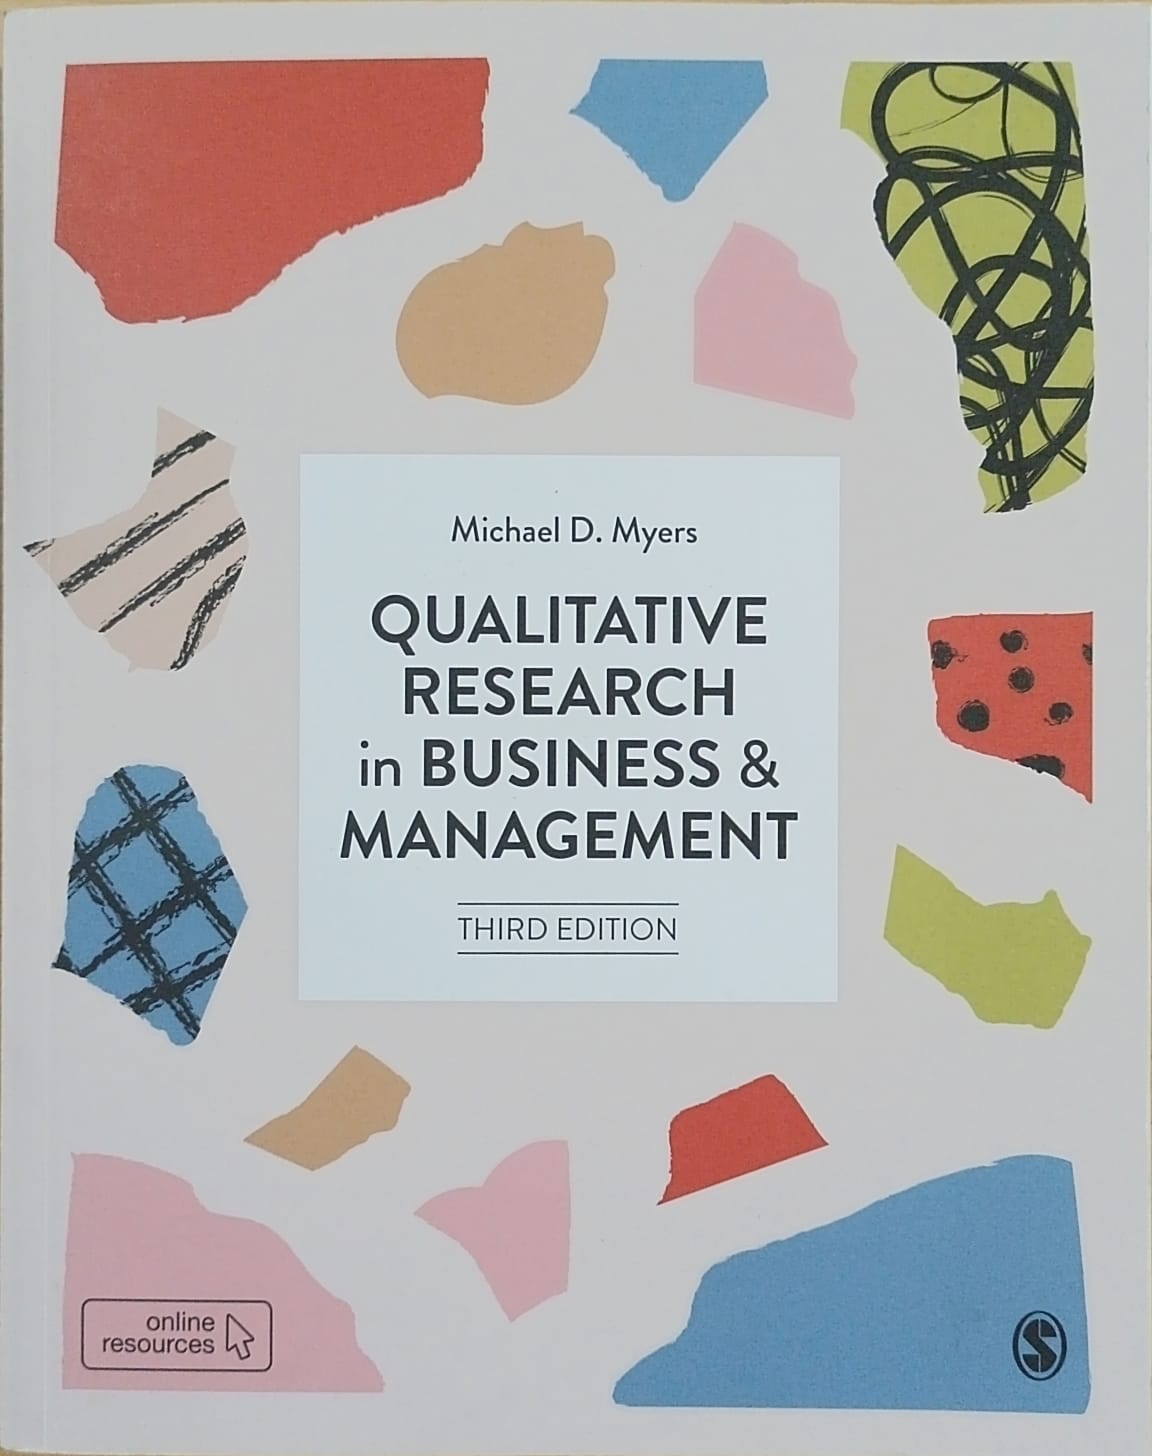 Qualitative research in business & management 3rd edition